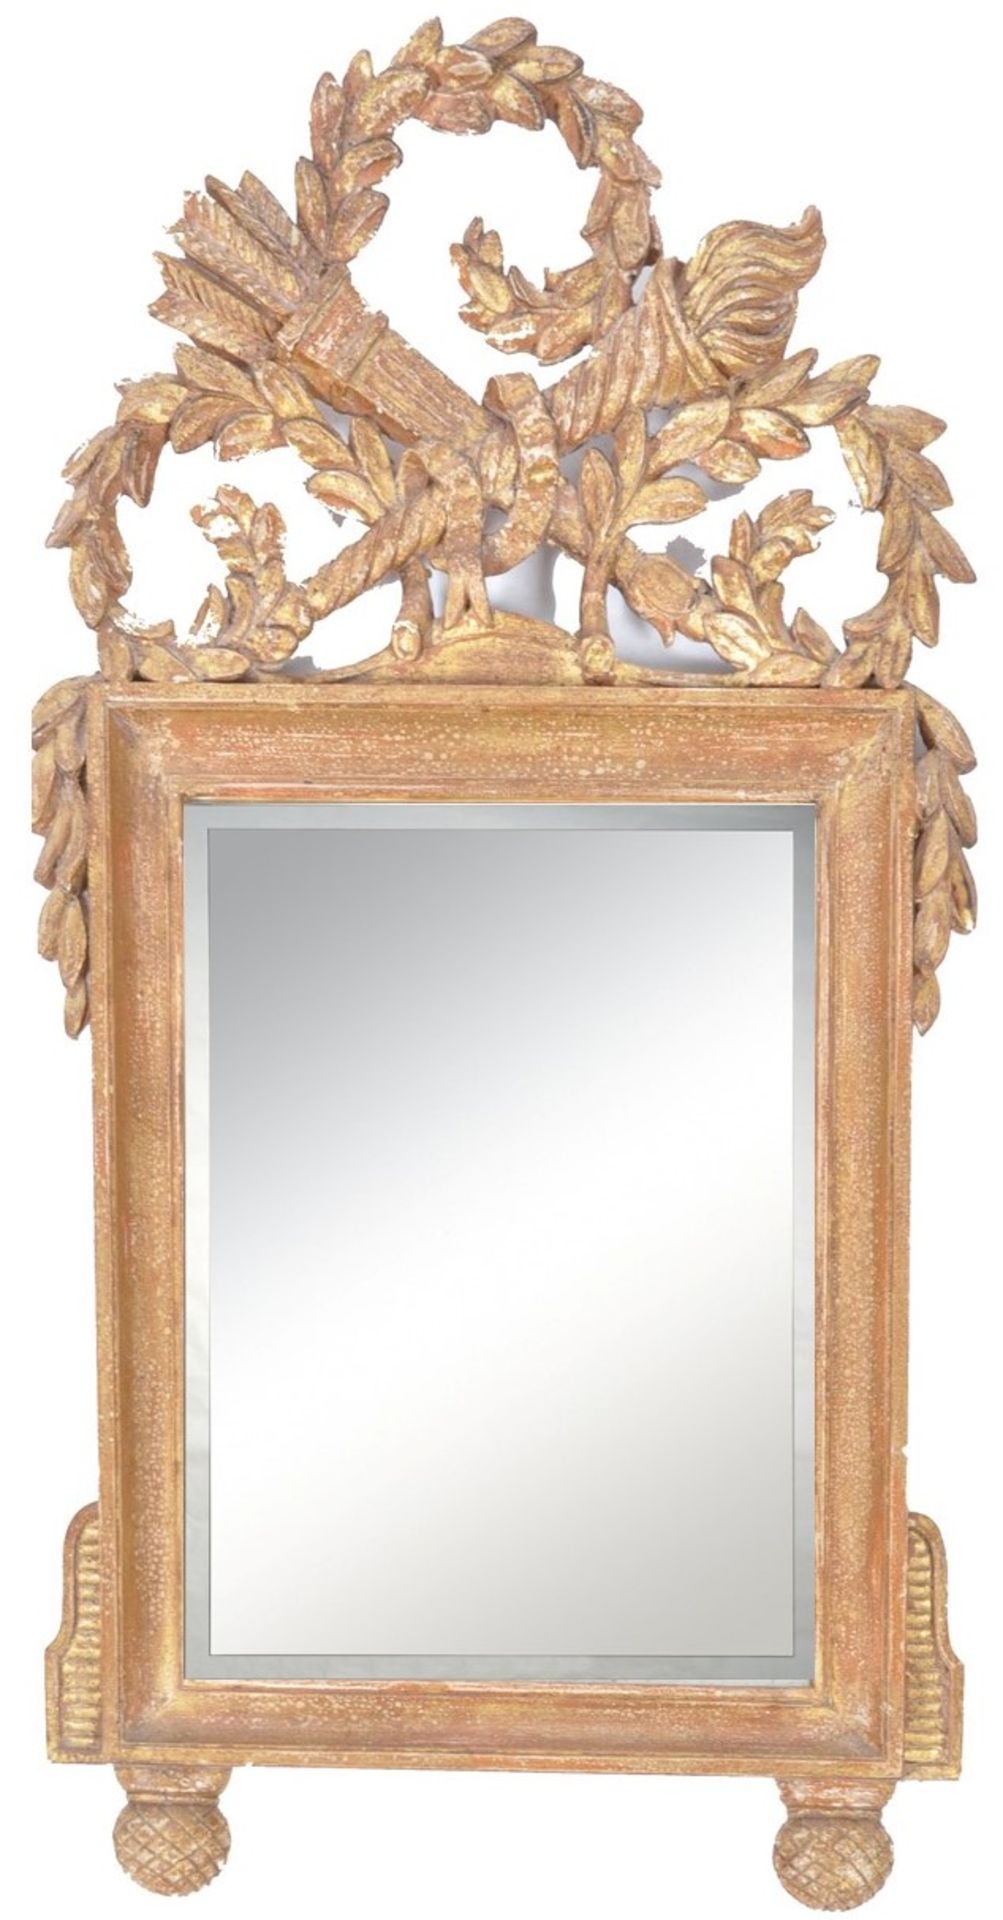 19TH CENTURY ITALIAN GILT WOOD WALL MIRROR WITH QUIVER & TORCH